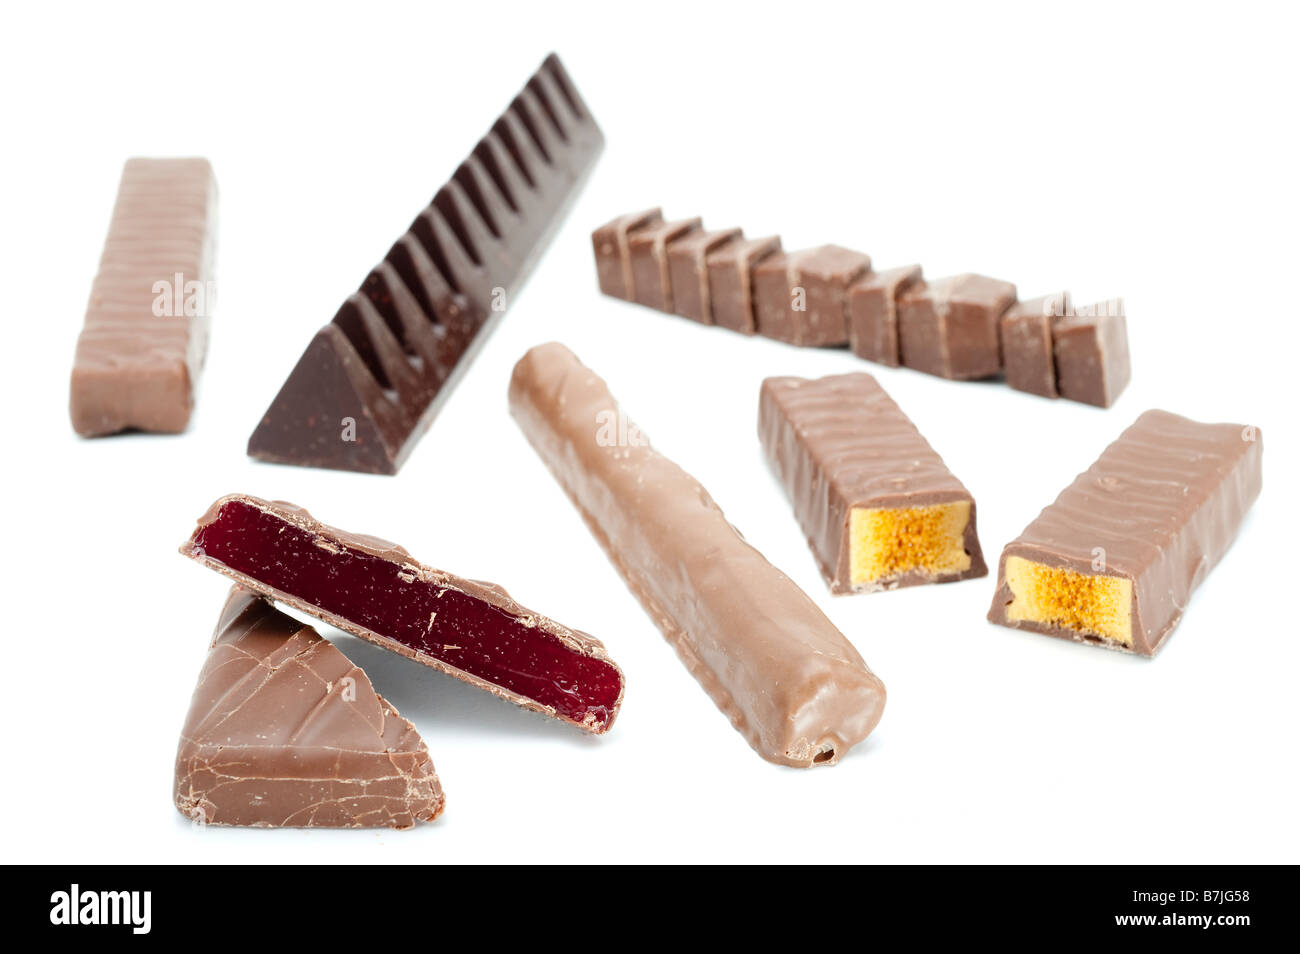 Mixed chocolate bars and pieces Stock Photo